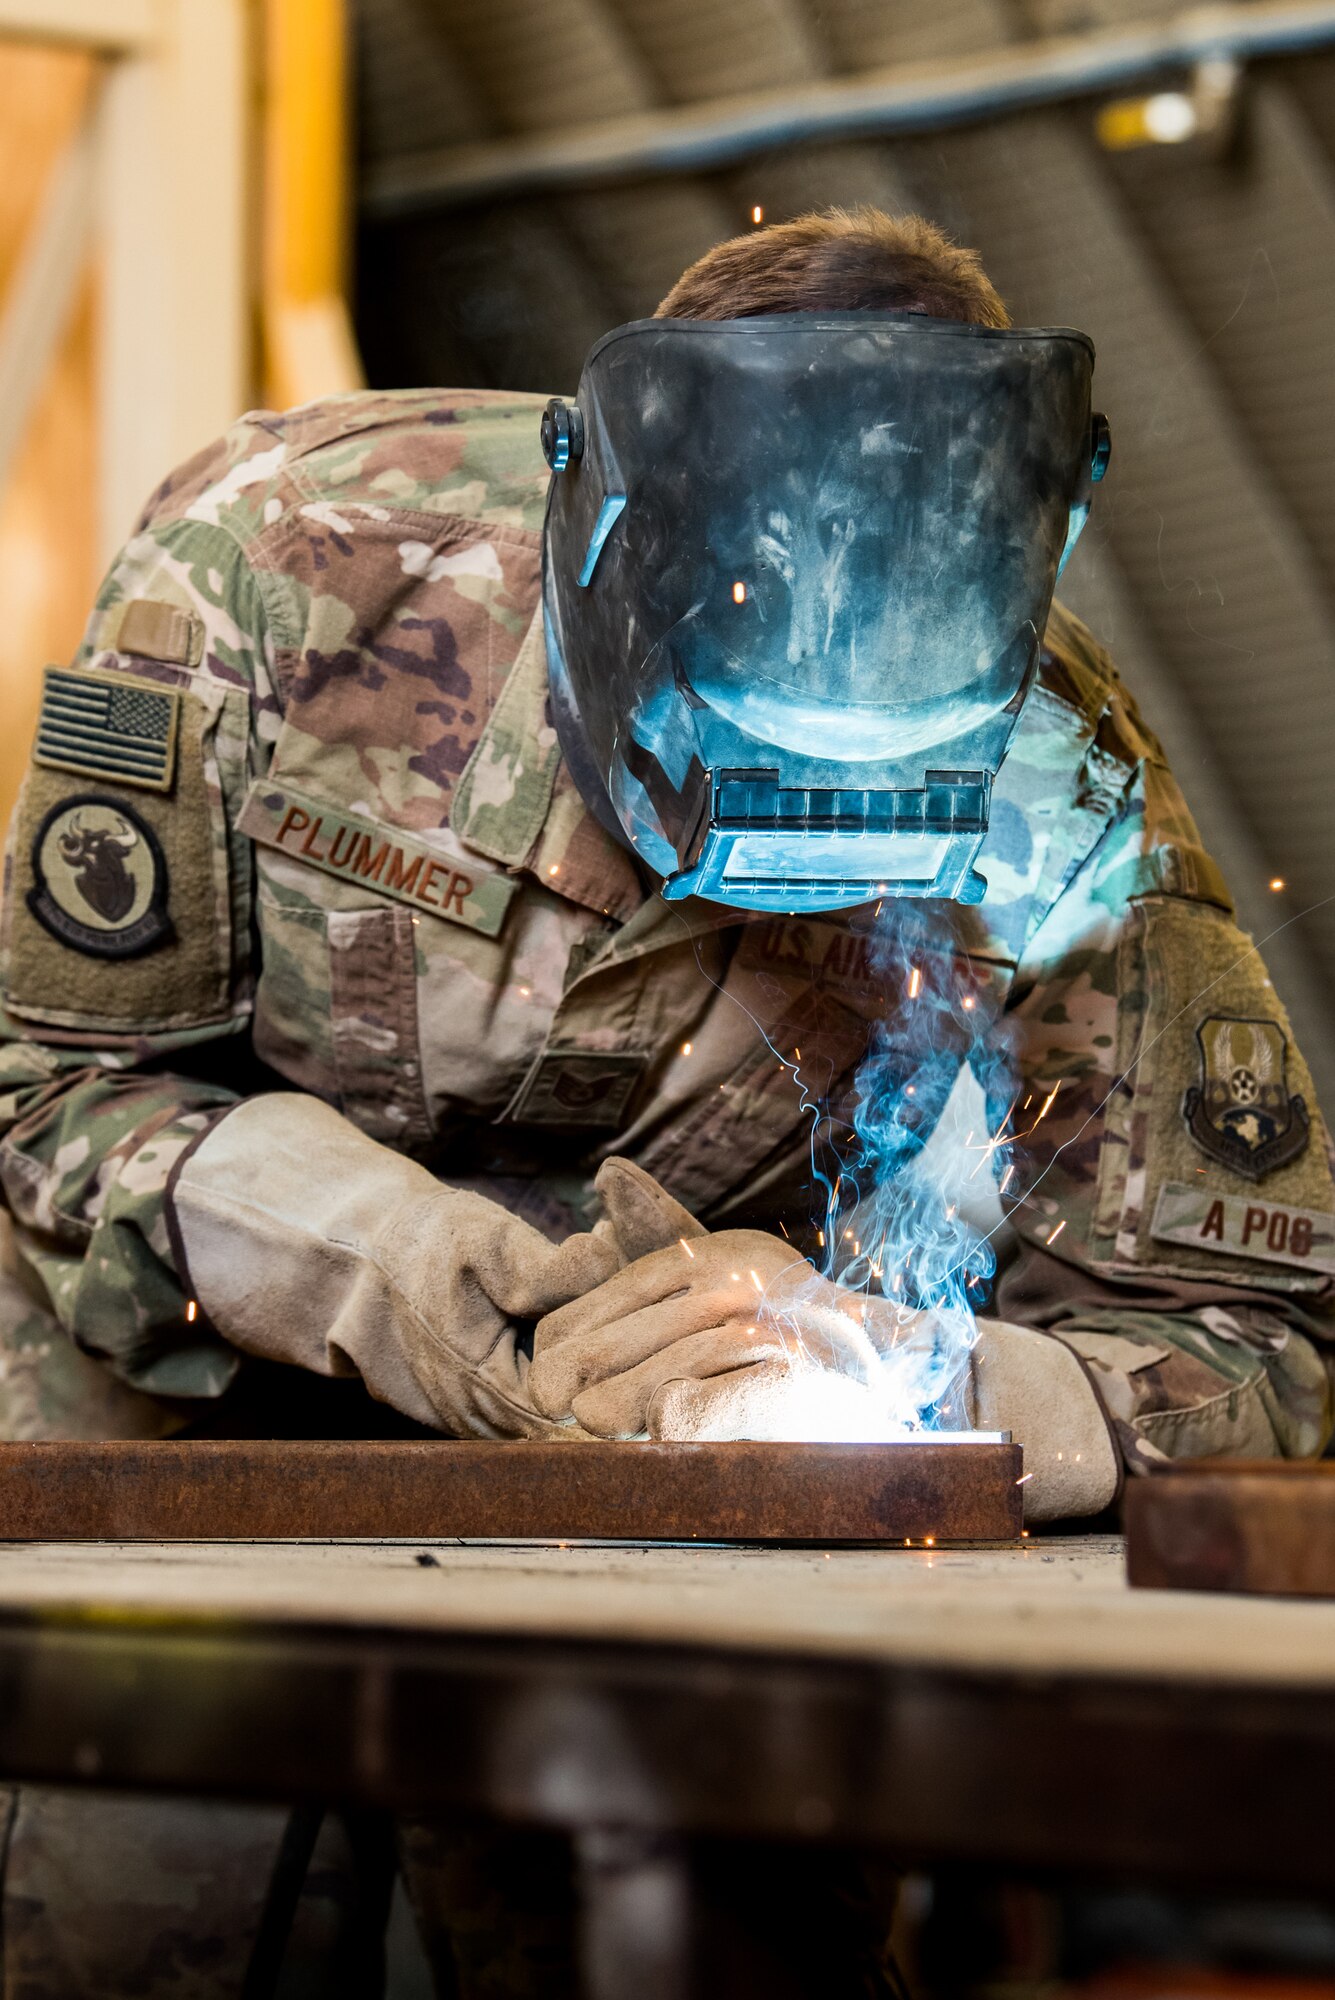 Tech. Sgt. Joshua Plummer, a water and fuels system maintenance craftsman for the1st Civil Engineer Group’s 577th Expeditionary Prime Base Engineer Emergency Force Squadron, welds parts for a shelf at Bagram Airfield, Afghanistan, May 5, 2018. Separate from traditional civil engineer units, the members of the 1st ECEG perform construction and repair in high-risk environments all across the area of operations. (U.S. Air Force photo by Staff Sgt. Joshua Horton)